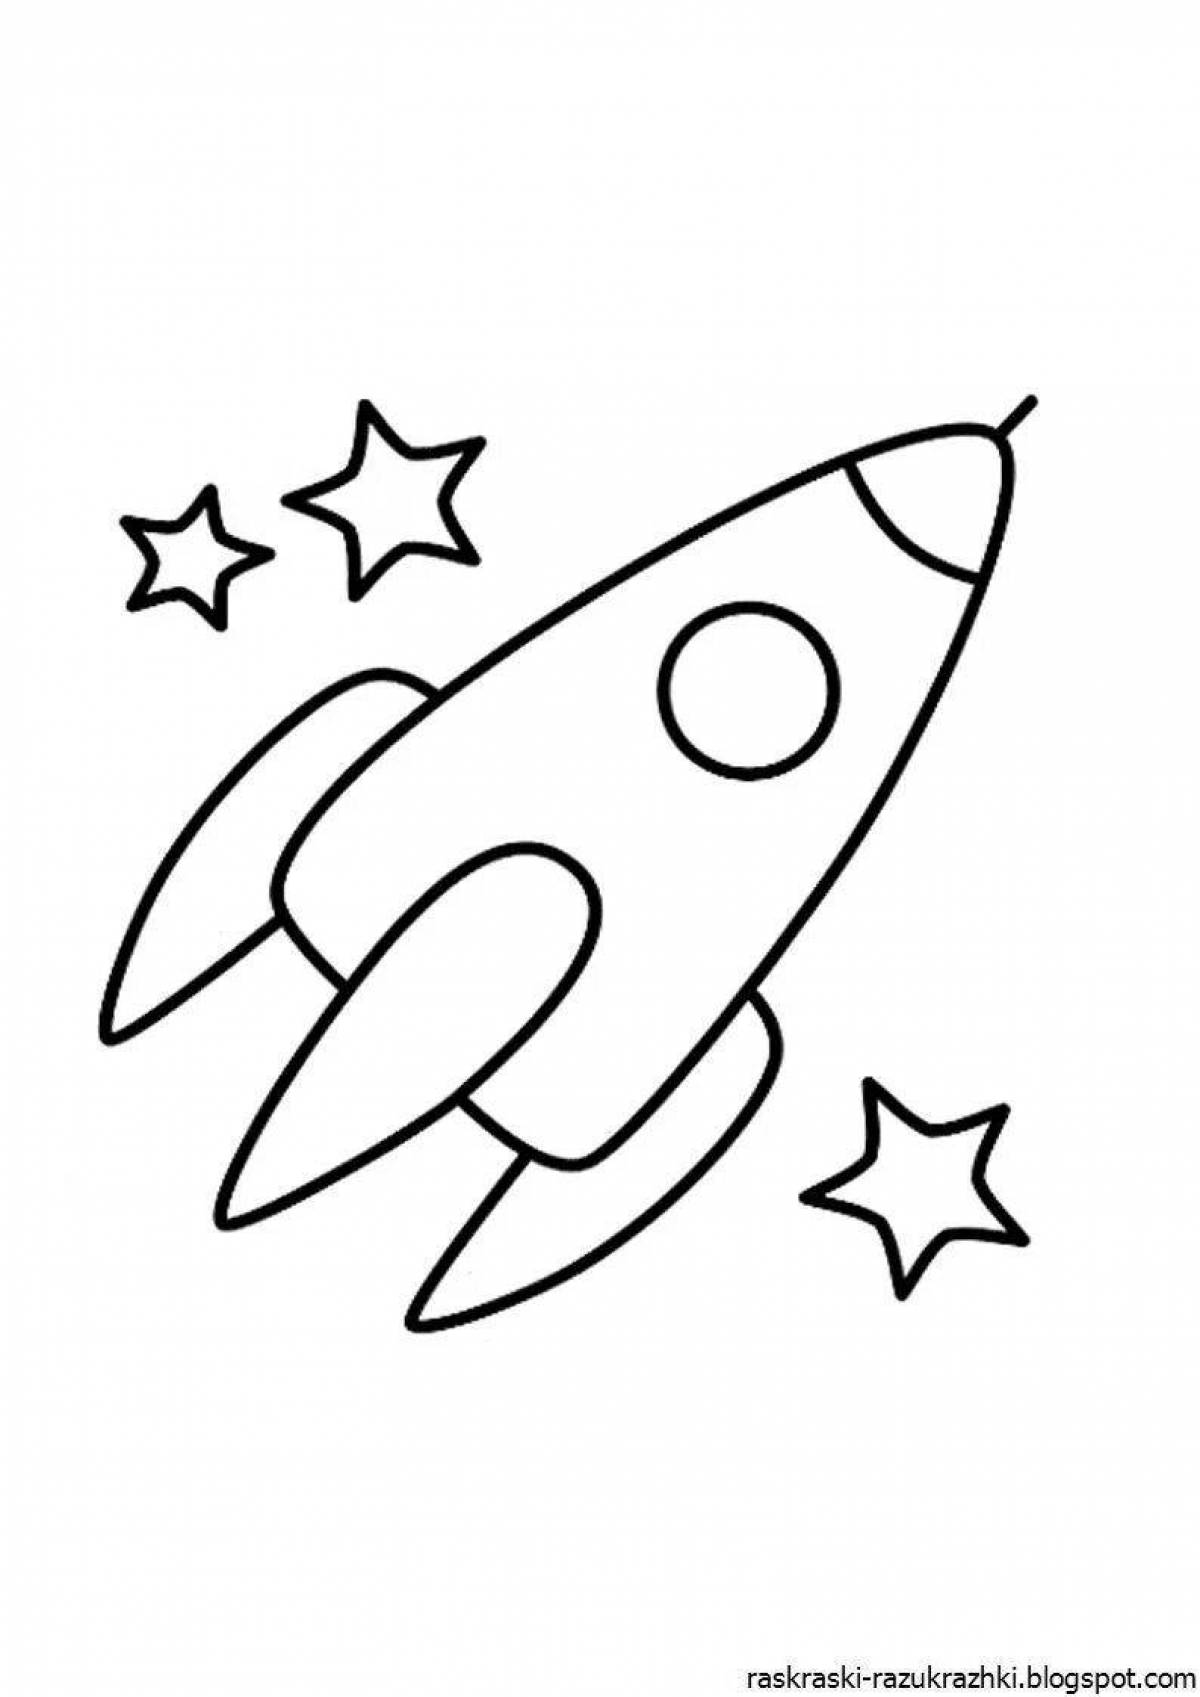 Adorable rocket coloring book for kids